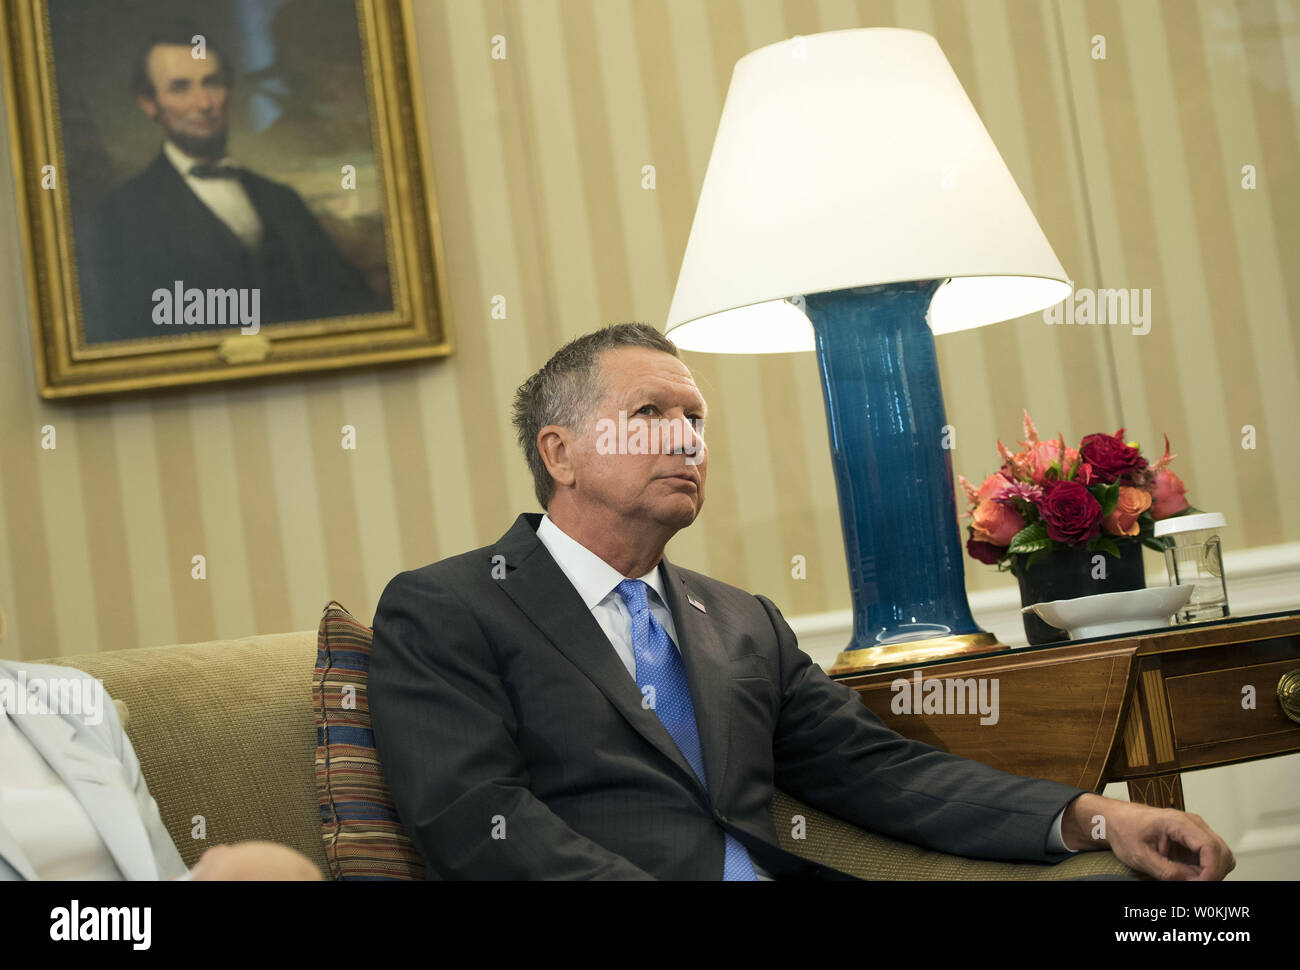 John Kasich, Governor of Ohio, attends a meeting with President Barack Obama and other business, government, and national security leaders to discuss the Trans-Pacific Partnership, in the Oval Office at the White House in Washington, D.C. on September 16, 2016. Photo by Kevin Dietsch/UPI Stock Photo